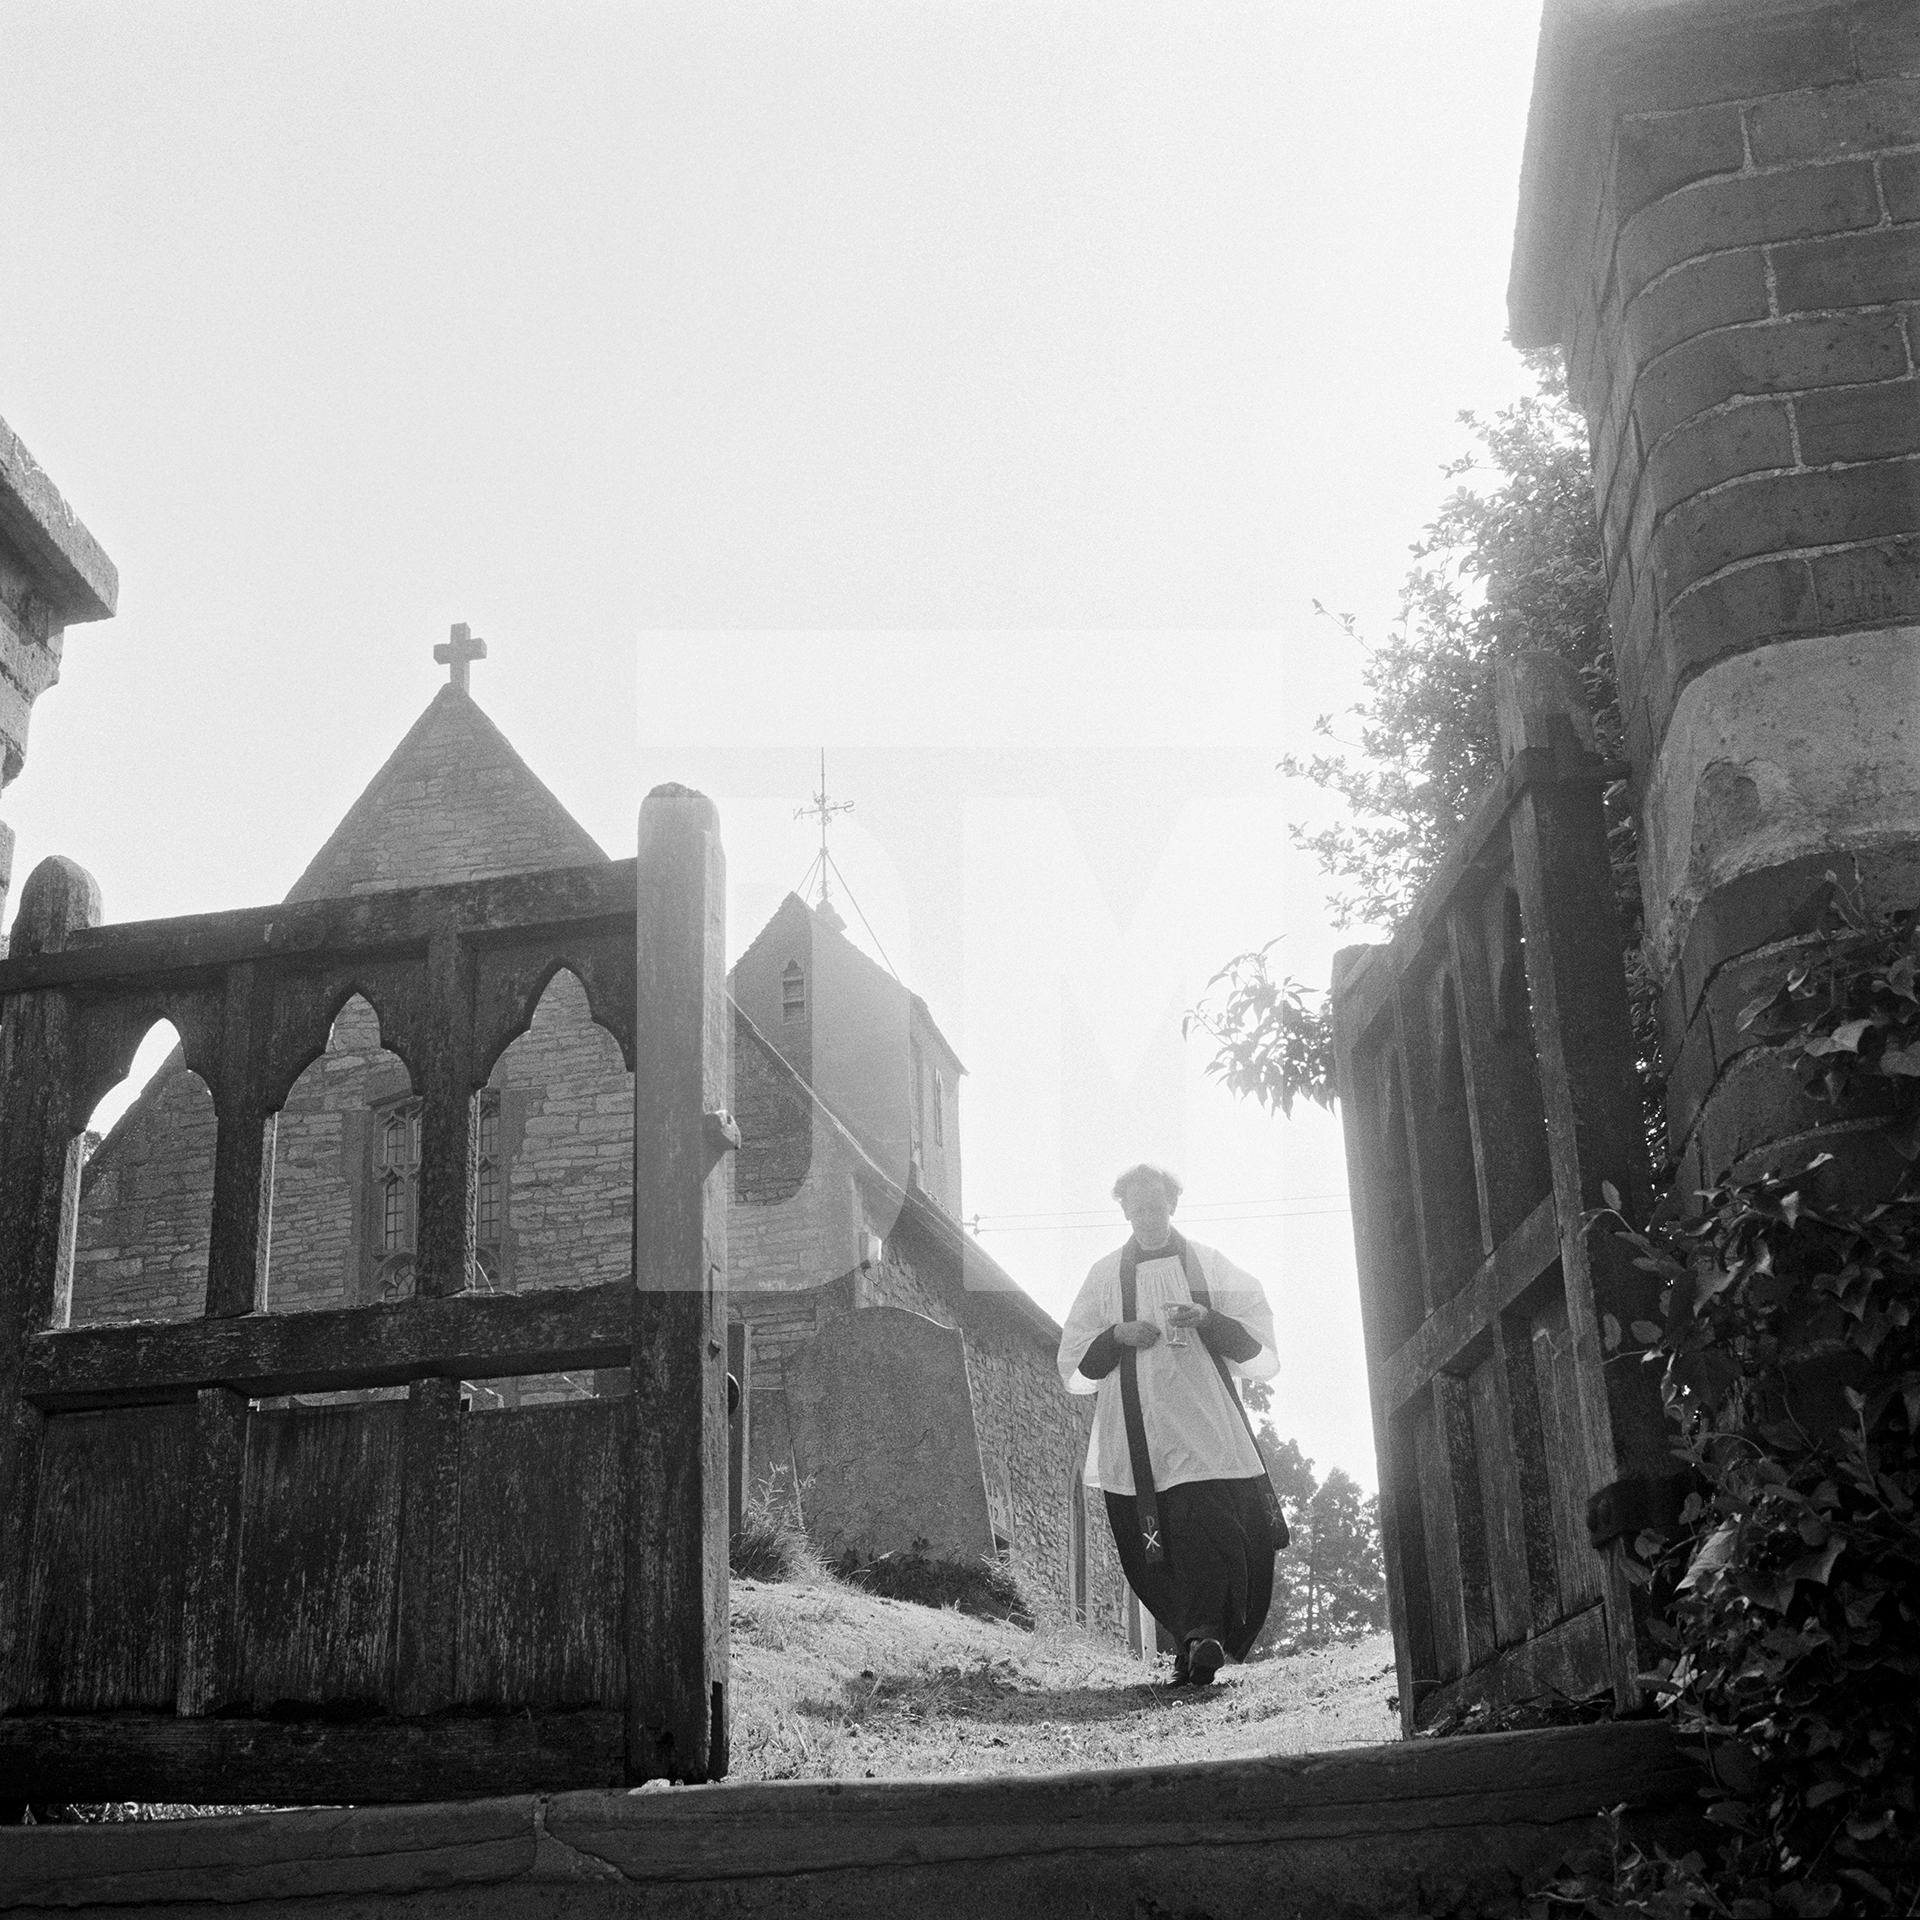 Vicar taking communion to parishoner out in the village during Sunday church service. Great Washbourne, Gloucestershire. July 1974 by Daniel Meadows